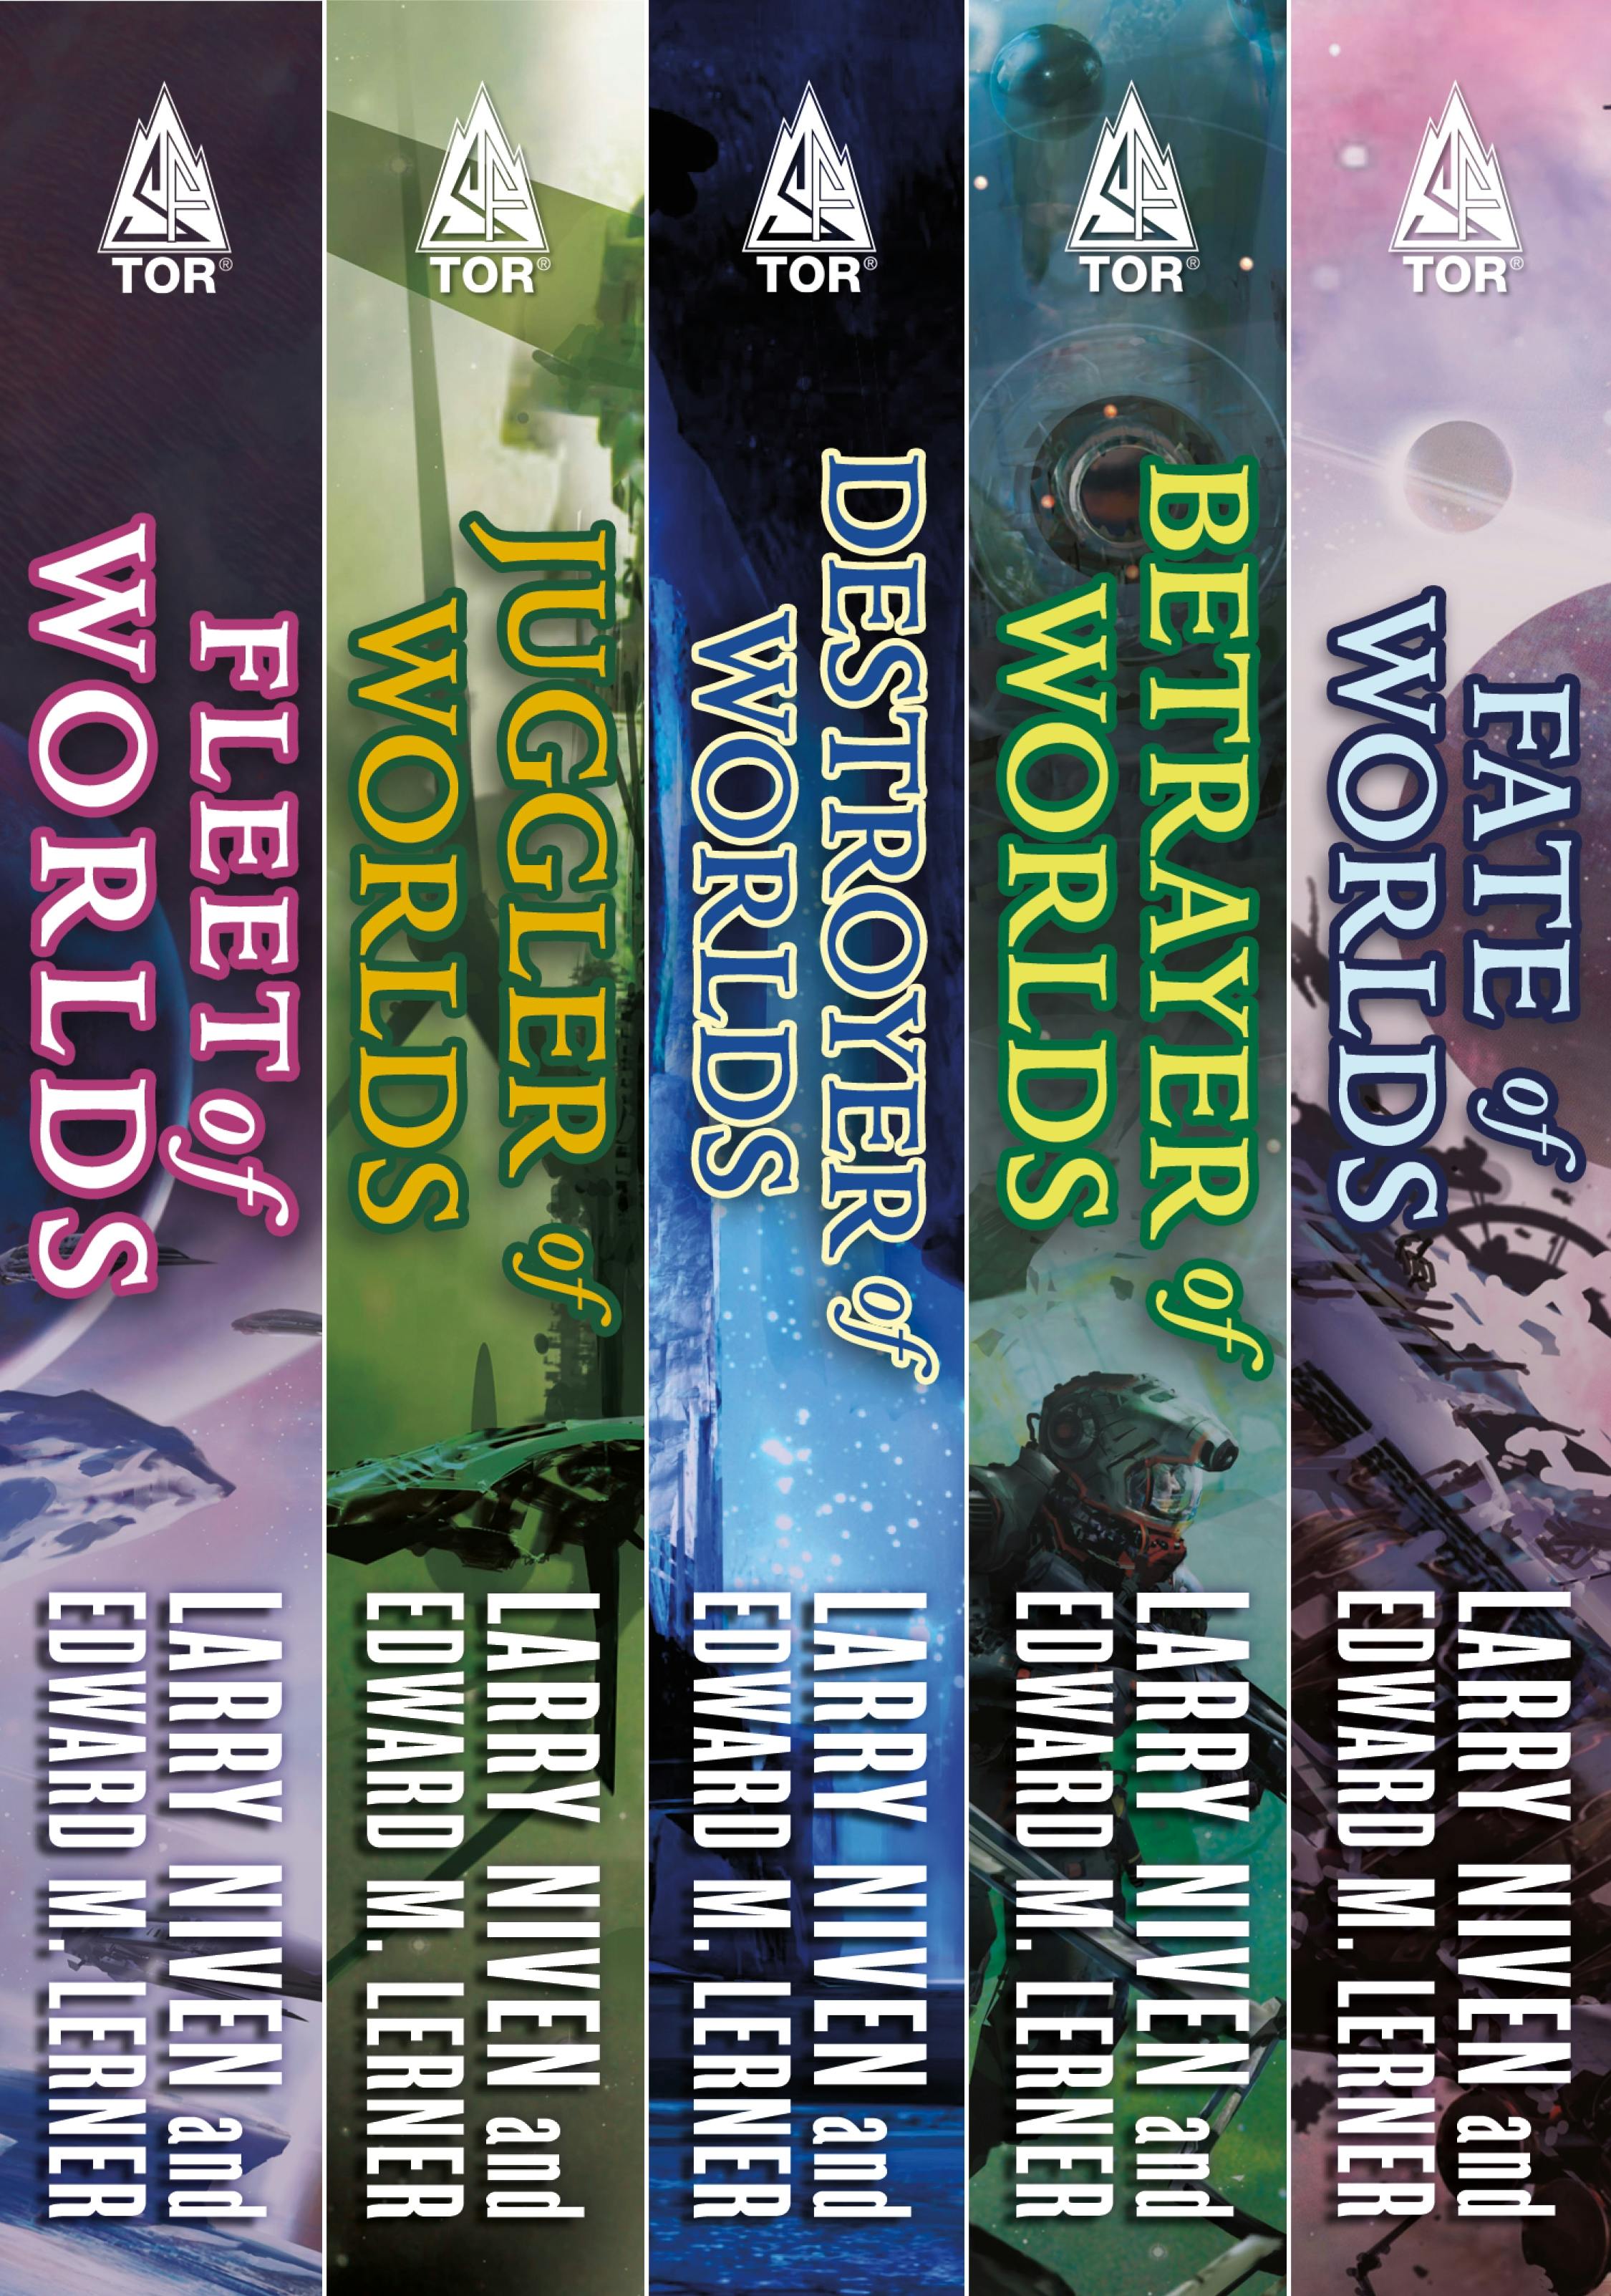 Cover for the book titled as: The Complete Fleet of Worlds